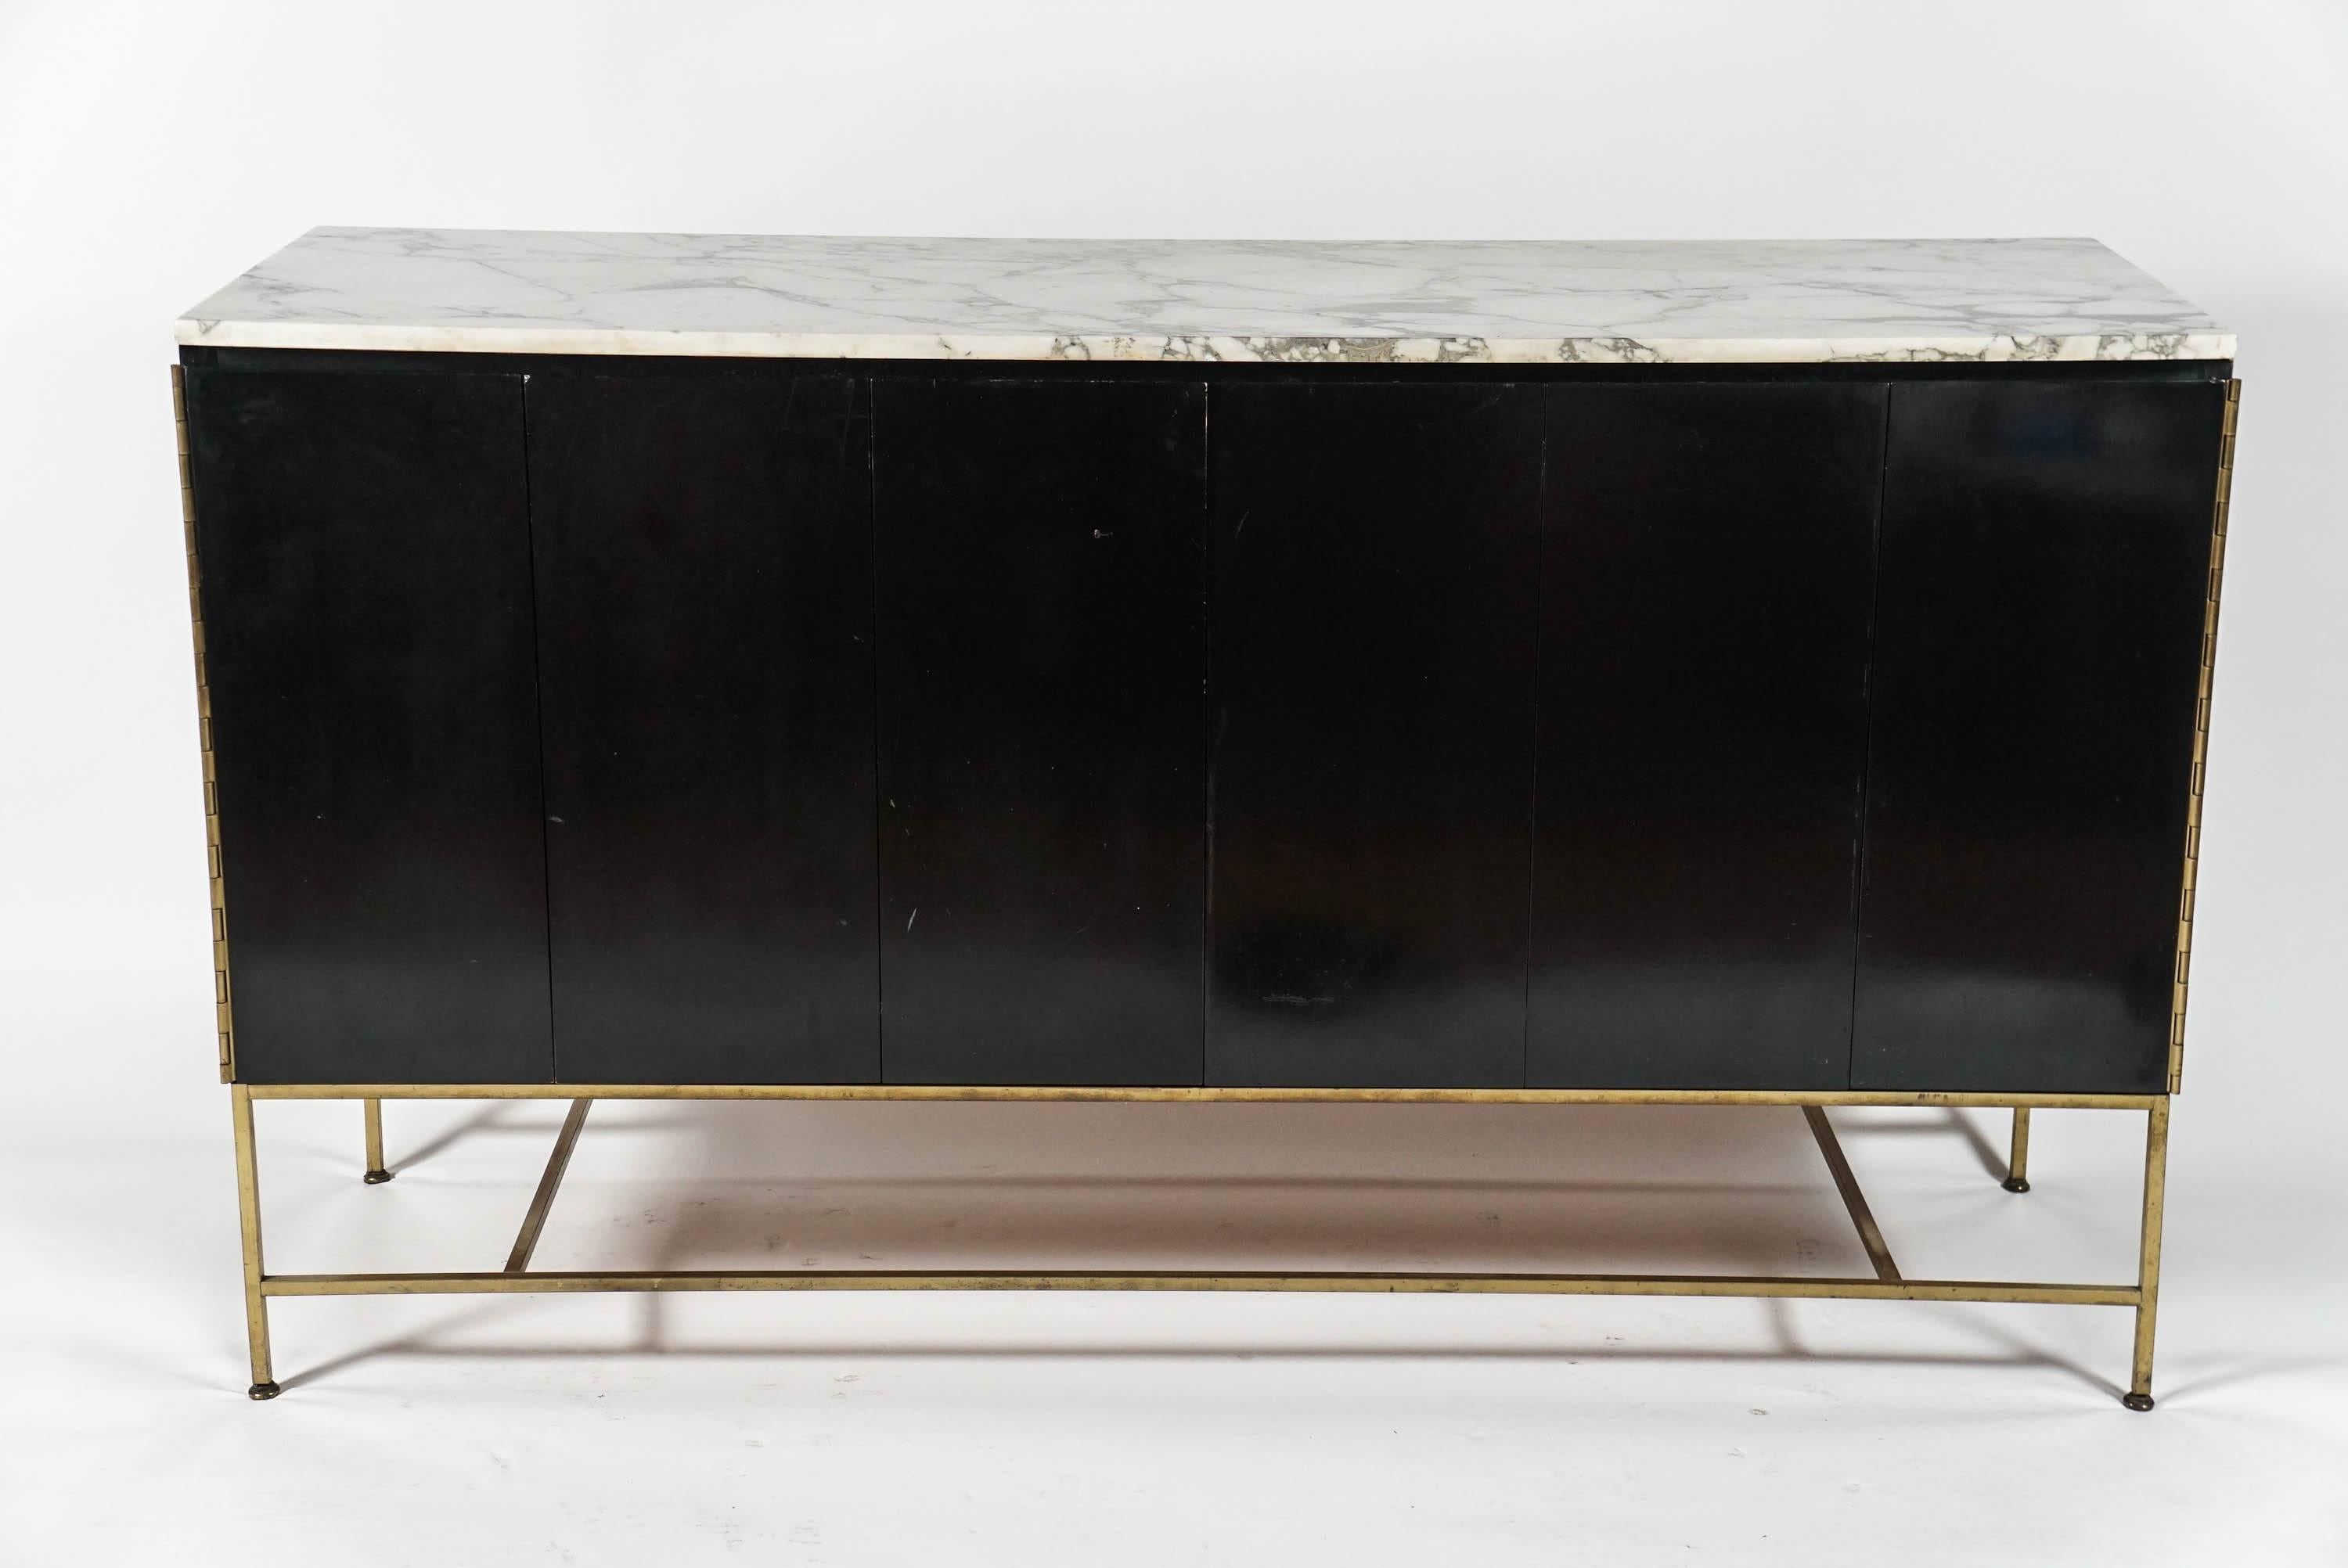 Exceptional Mid-Century eight-drawer credenza by Paul McCobb.